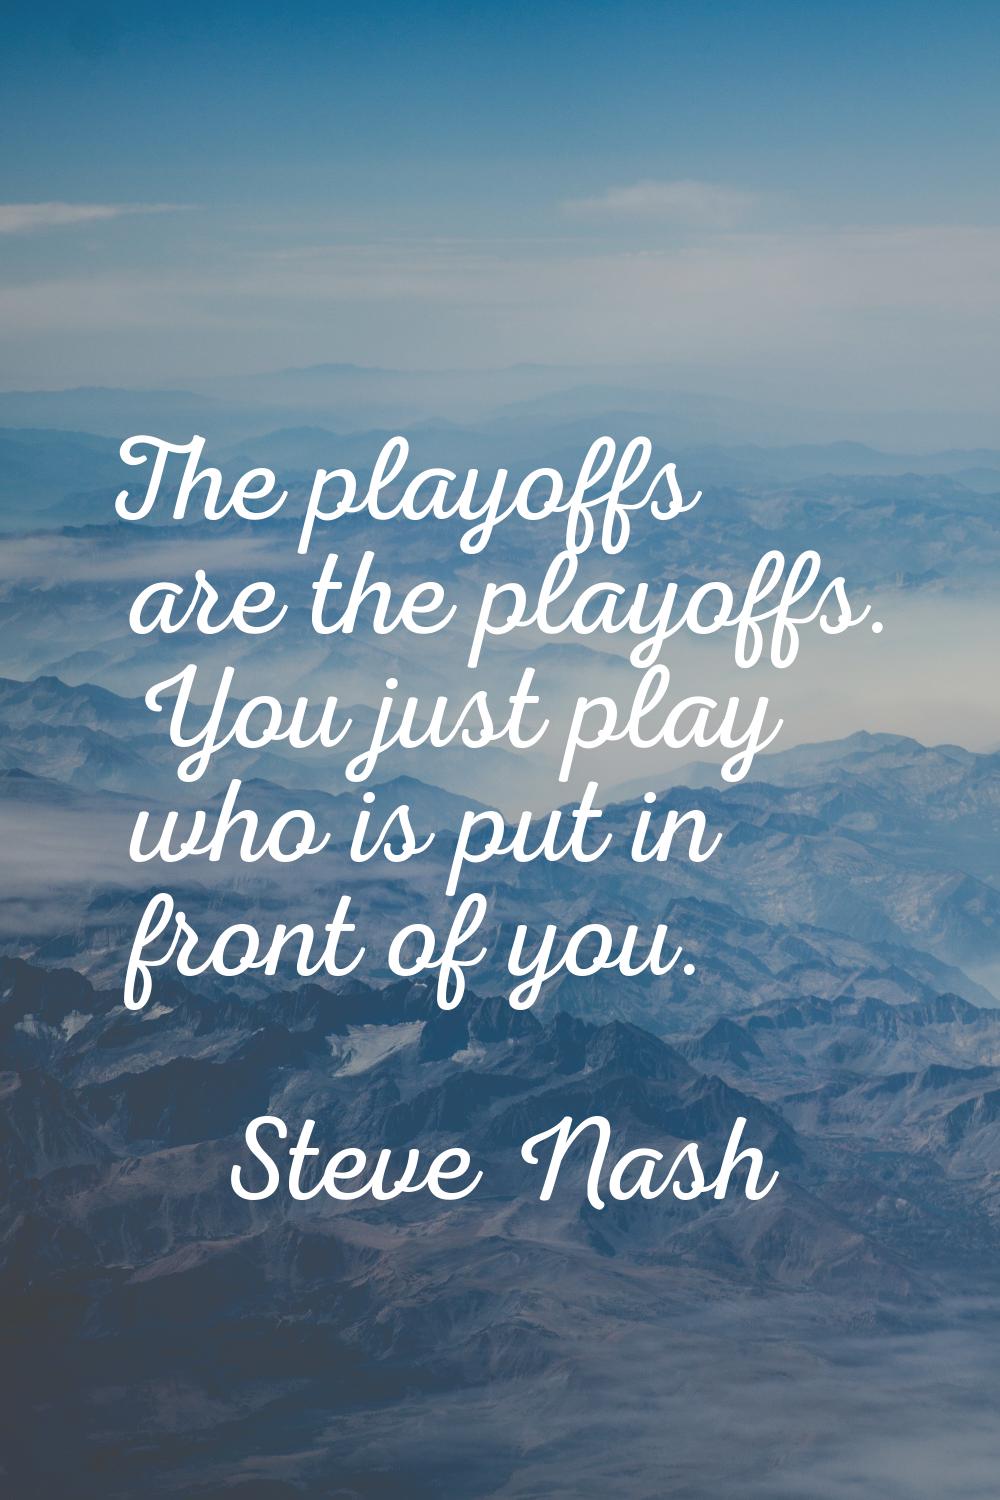 The playoffs are the playoffs. You just play who is put in front of you.